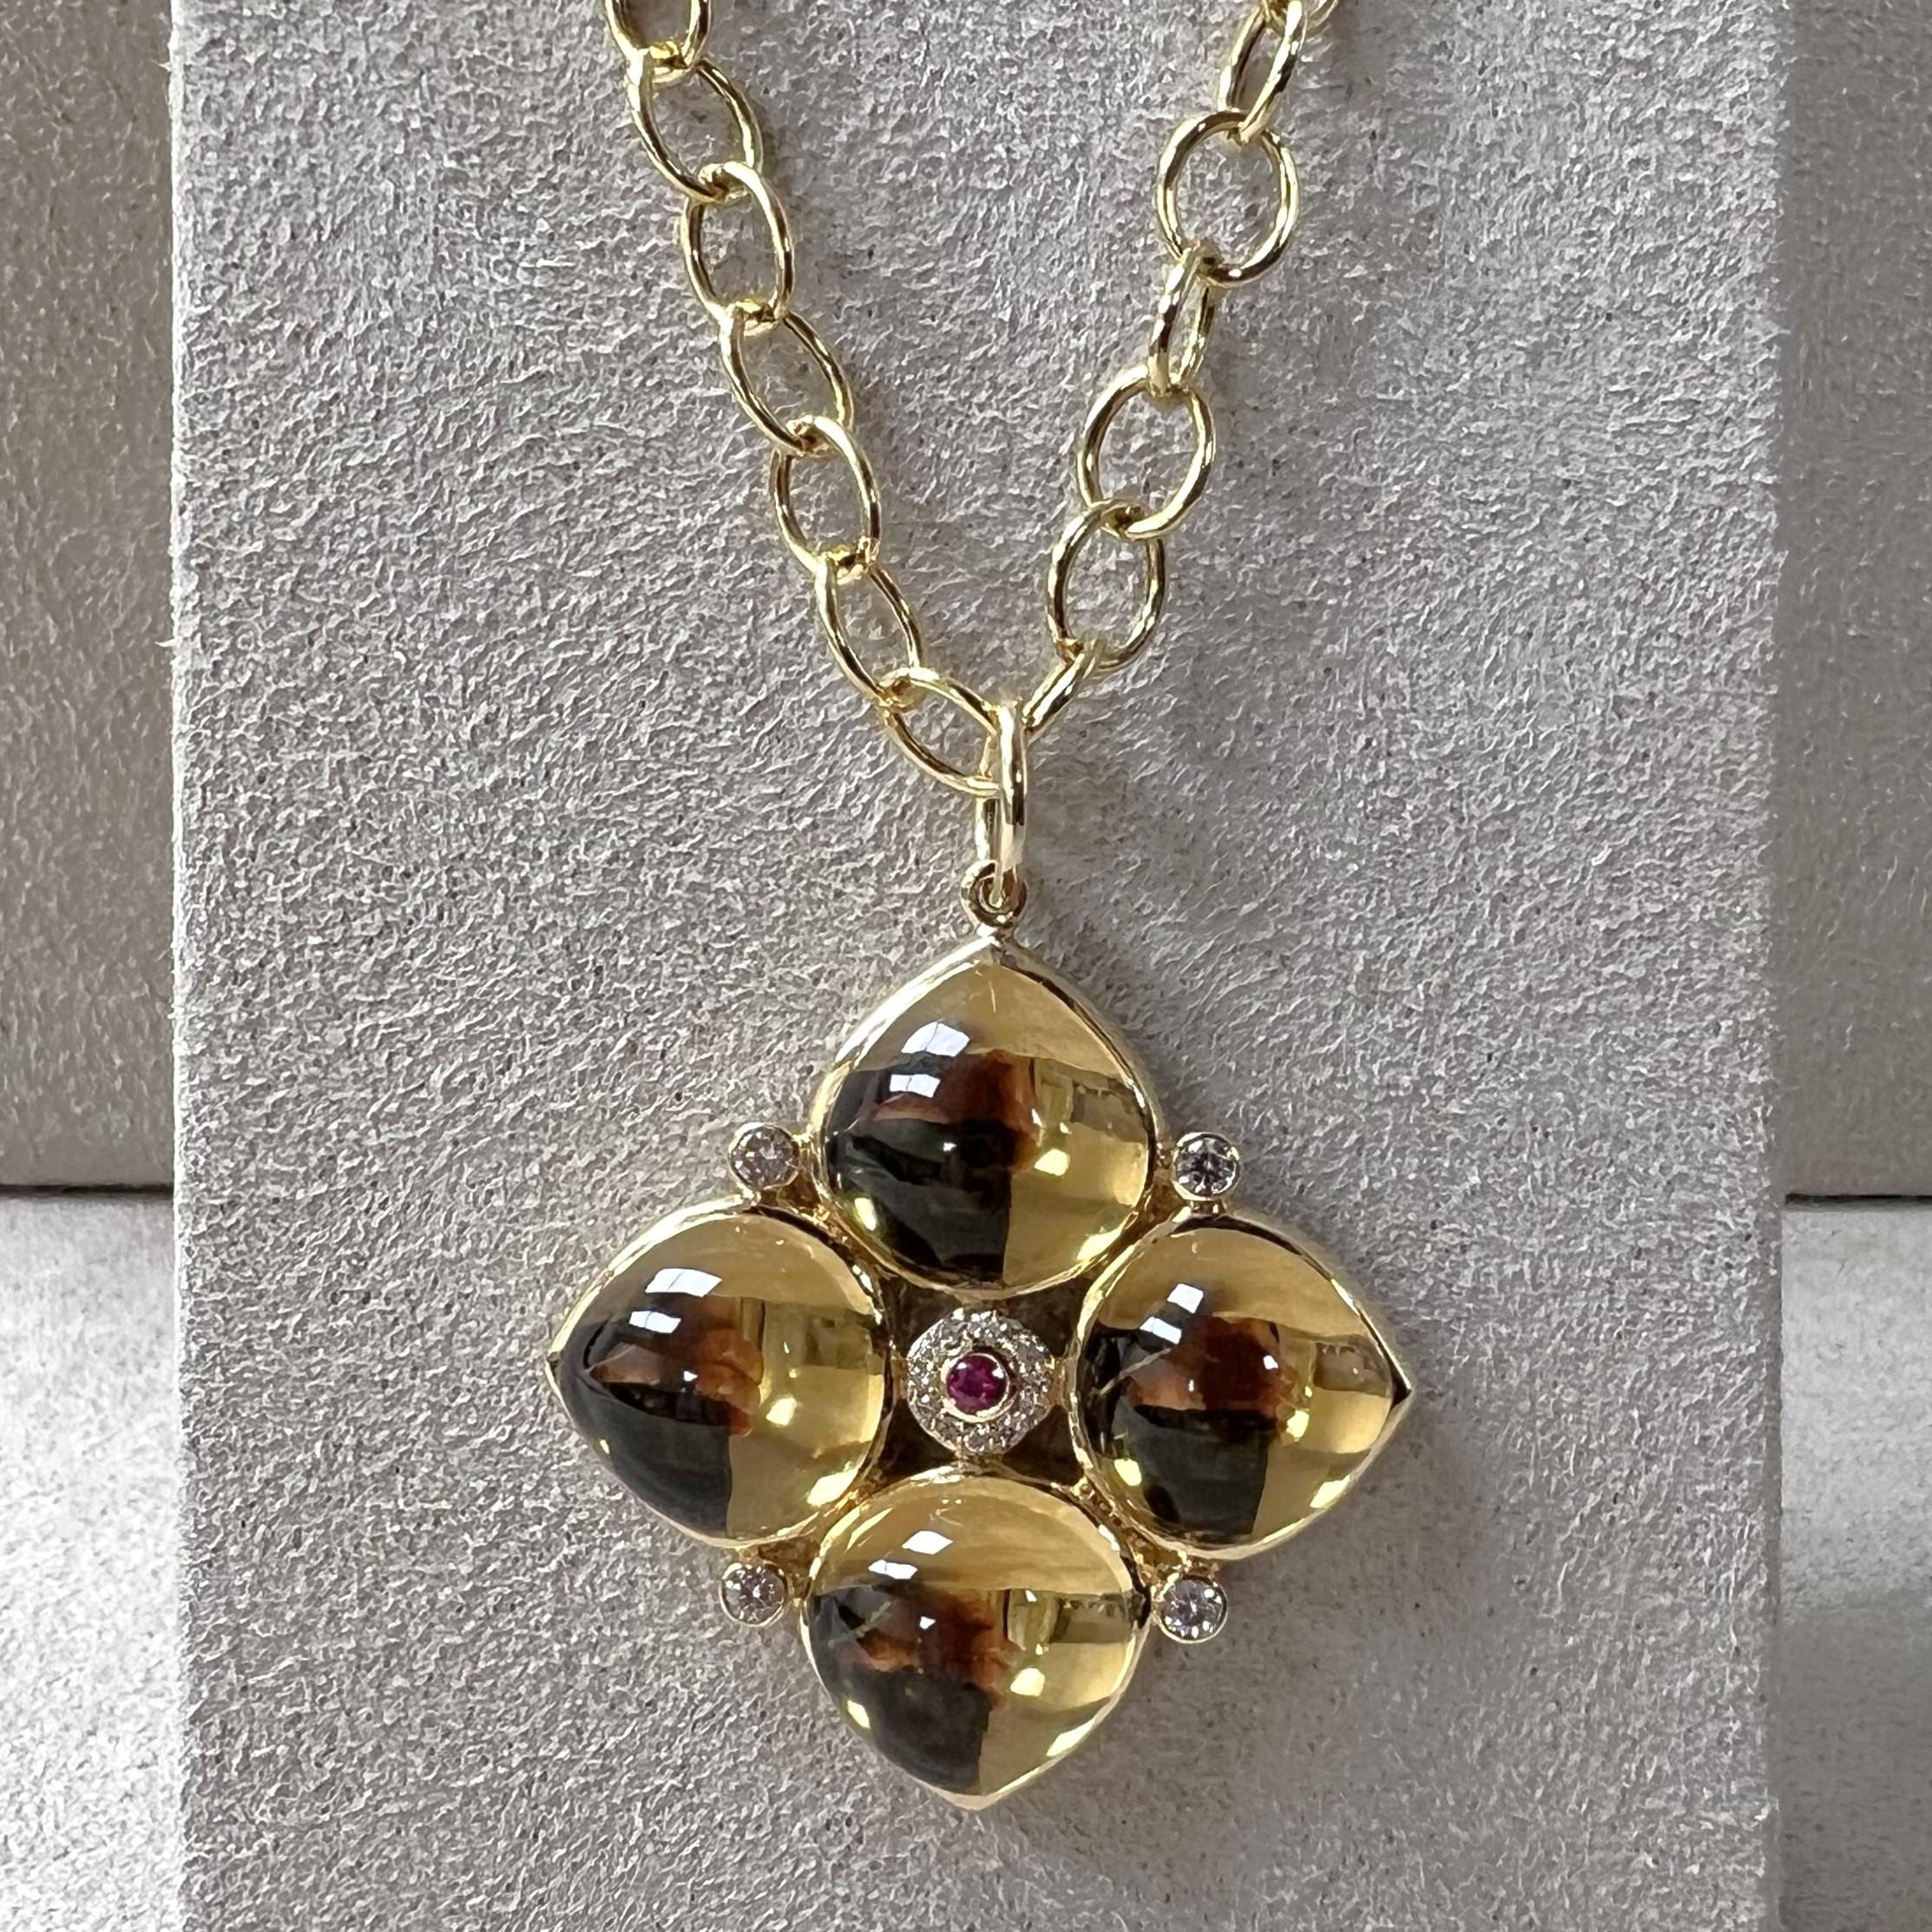 Created in 18 karat yellow gold
Citrine 23 carats approx.
Ruby 0.05 carat approx.
Diamonds 0.20 carat approx.
Chain sold separately 
Limited edition

Crafted from 18k yellow gold and adorned with 23 carats of Citrine, a 0.05 carat Ruby, and 0.20